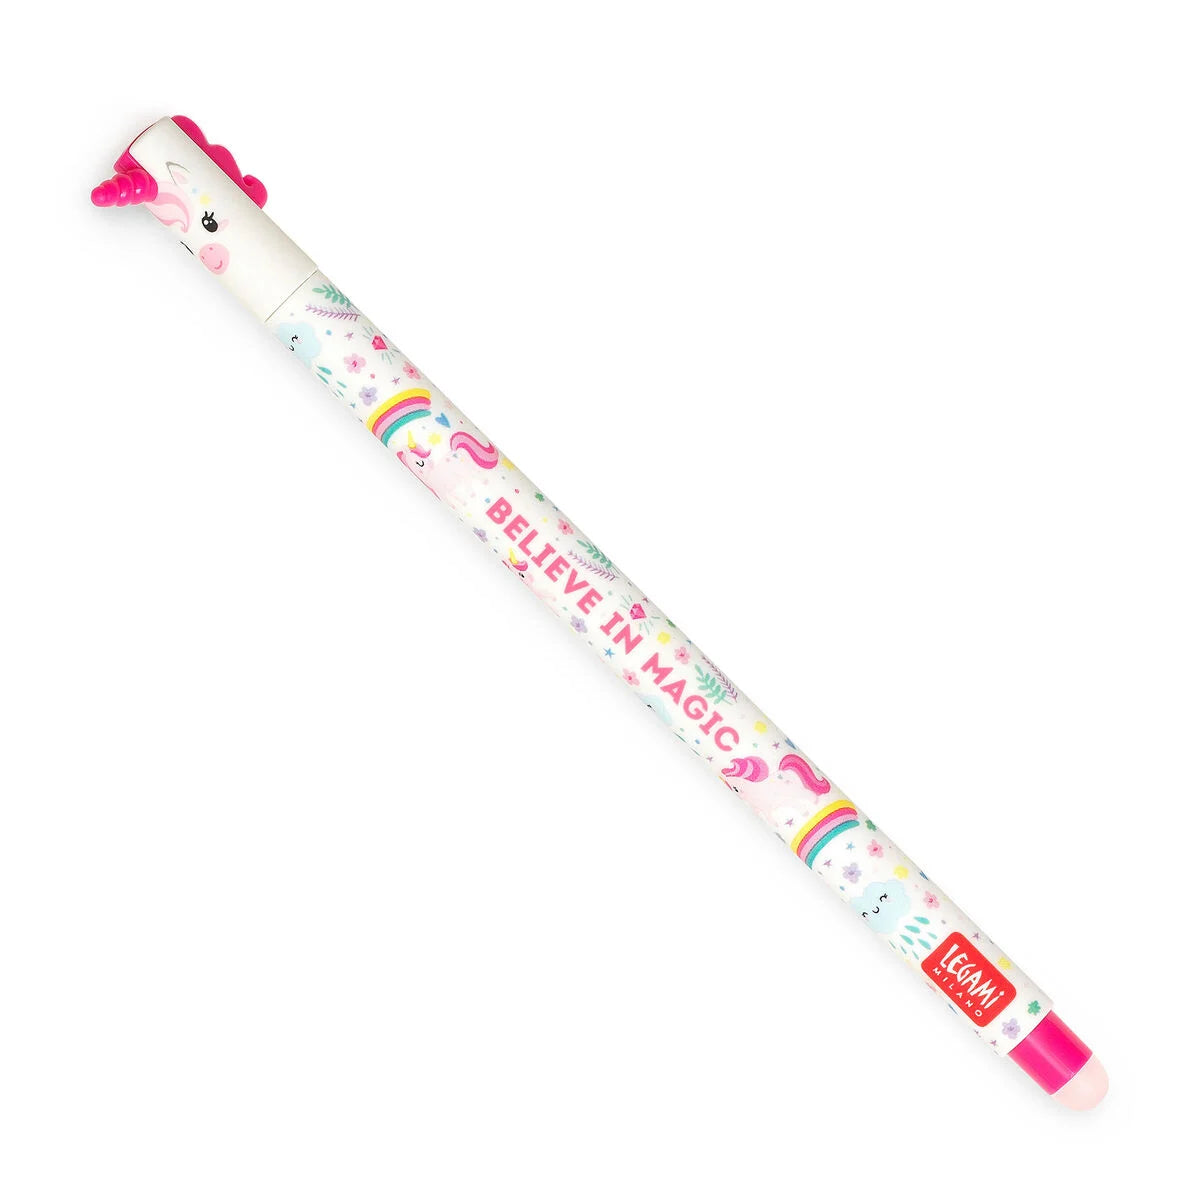 Fabulous Gifts Legami Stationery Legami Erasable Gel Pen Unicorn Pink by Weirs of Baggot Street